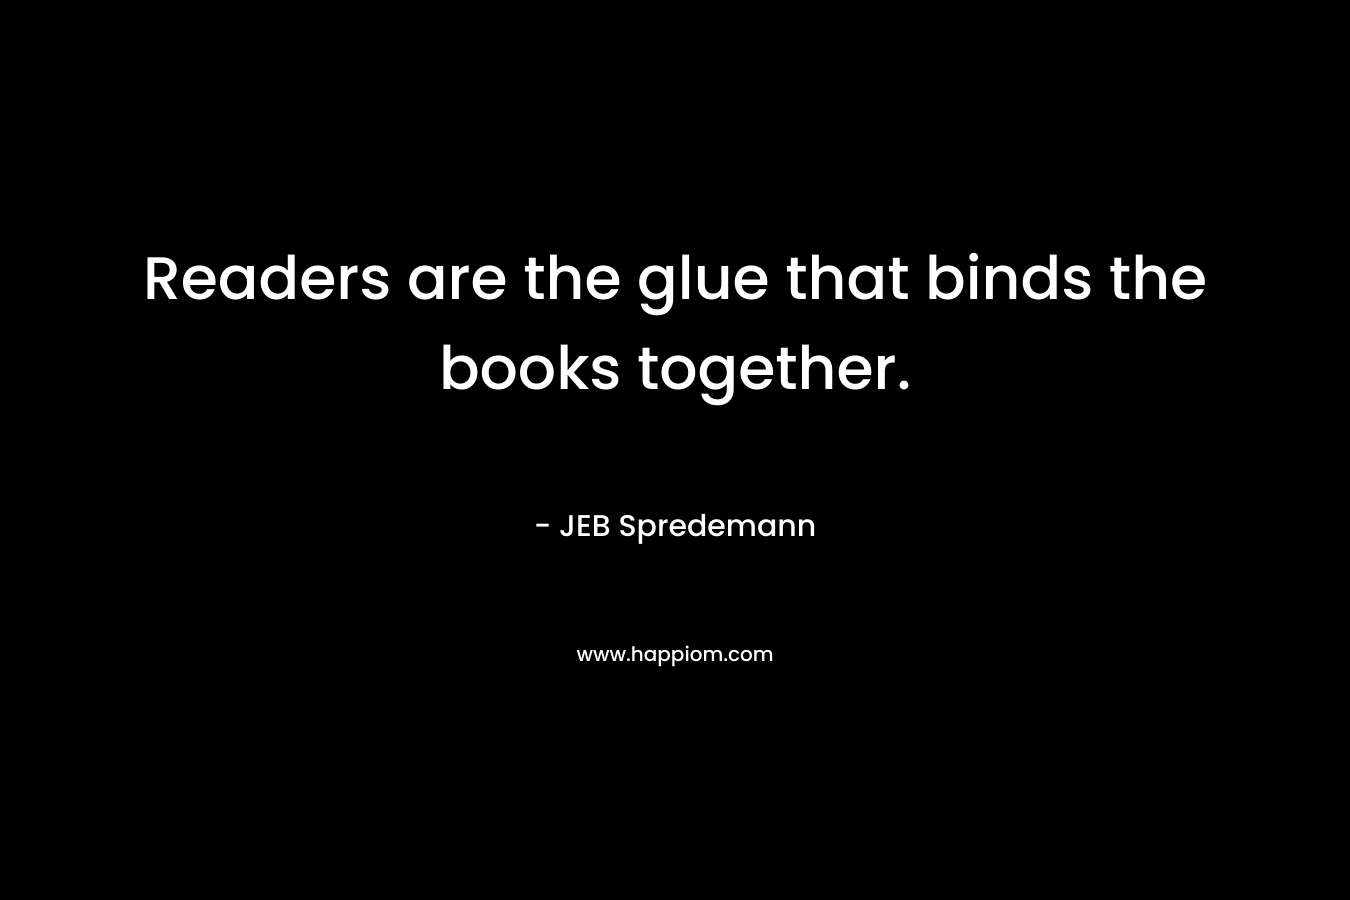 Readers are the glue that binds the books together. – JEB Spredemann